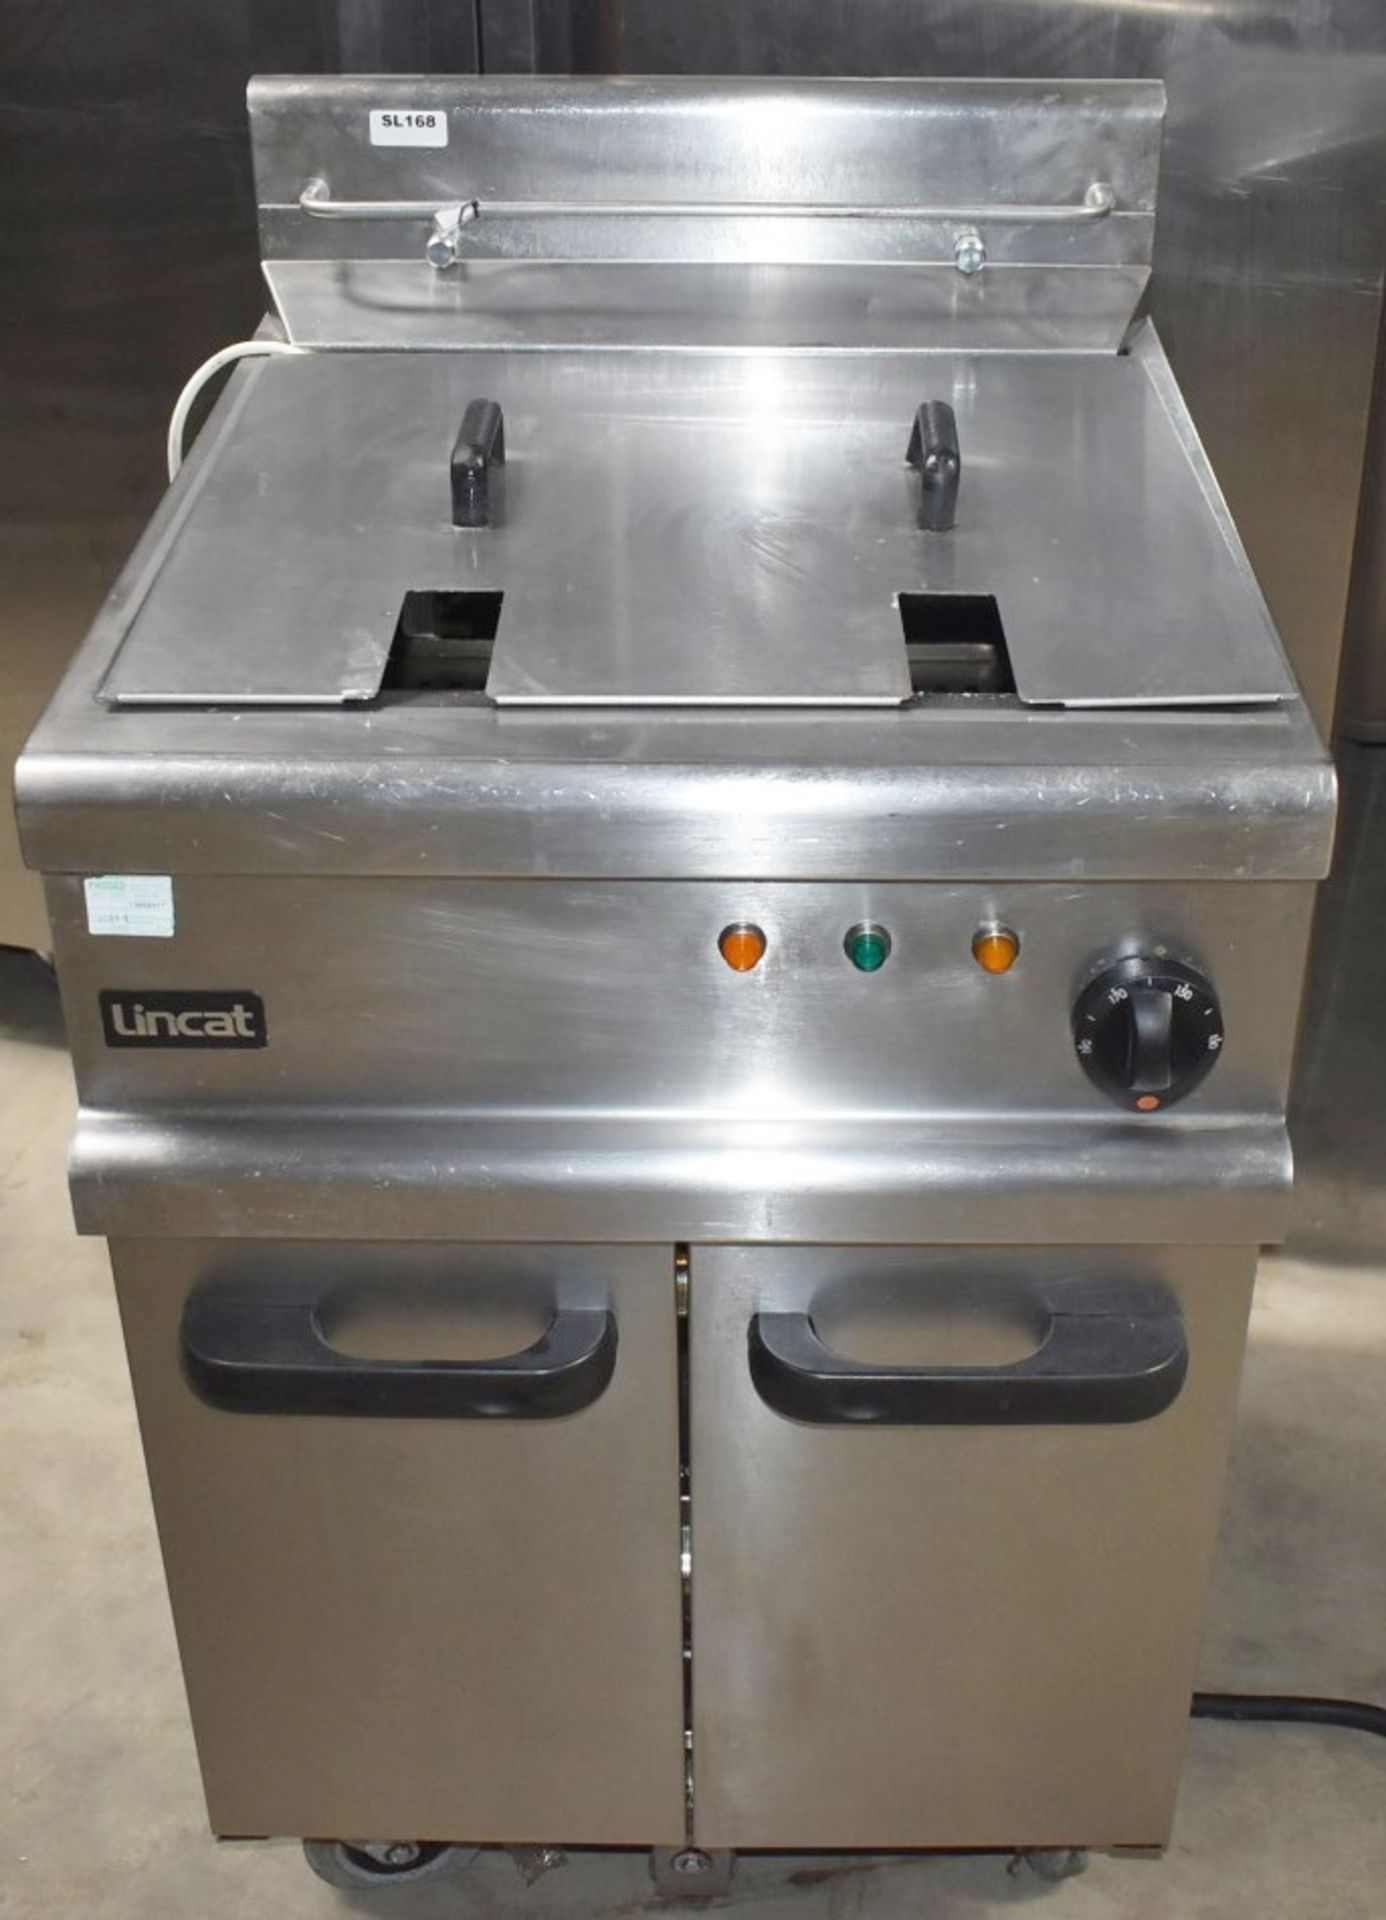 1 x Lincat Opus 700 Single Tank Electric Fryer With Built In Filtration - 3 Phase - Image 2 of 19